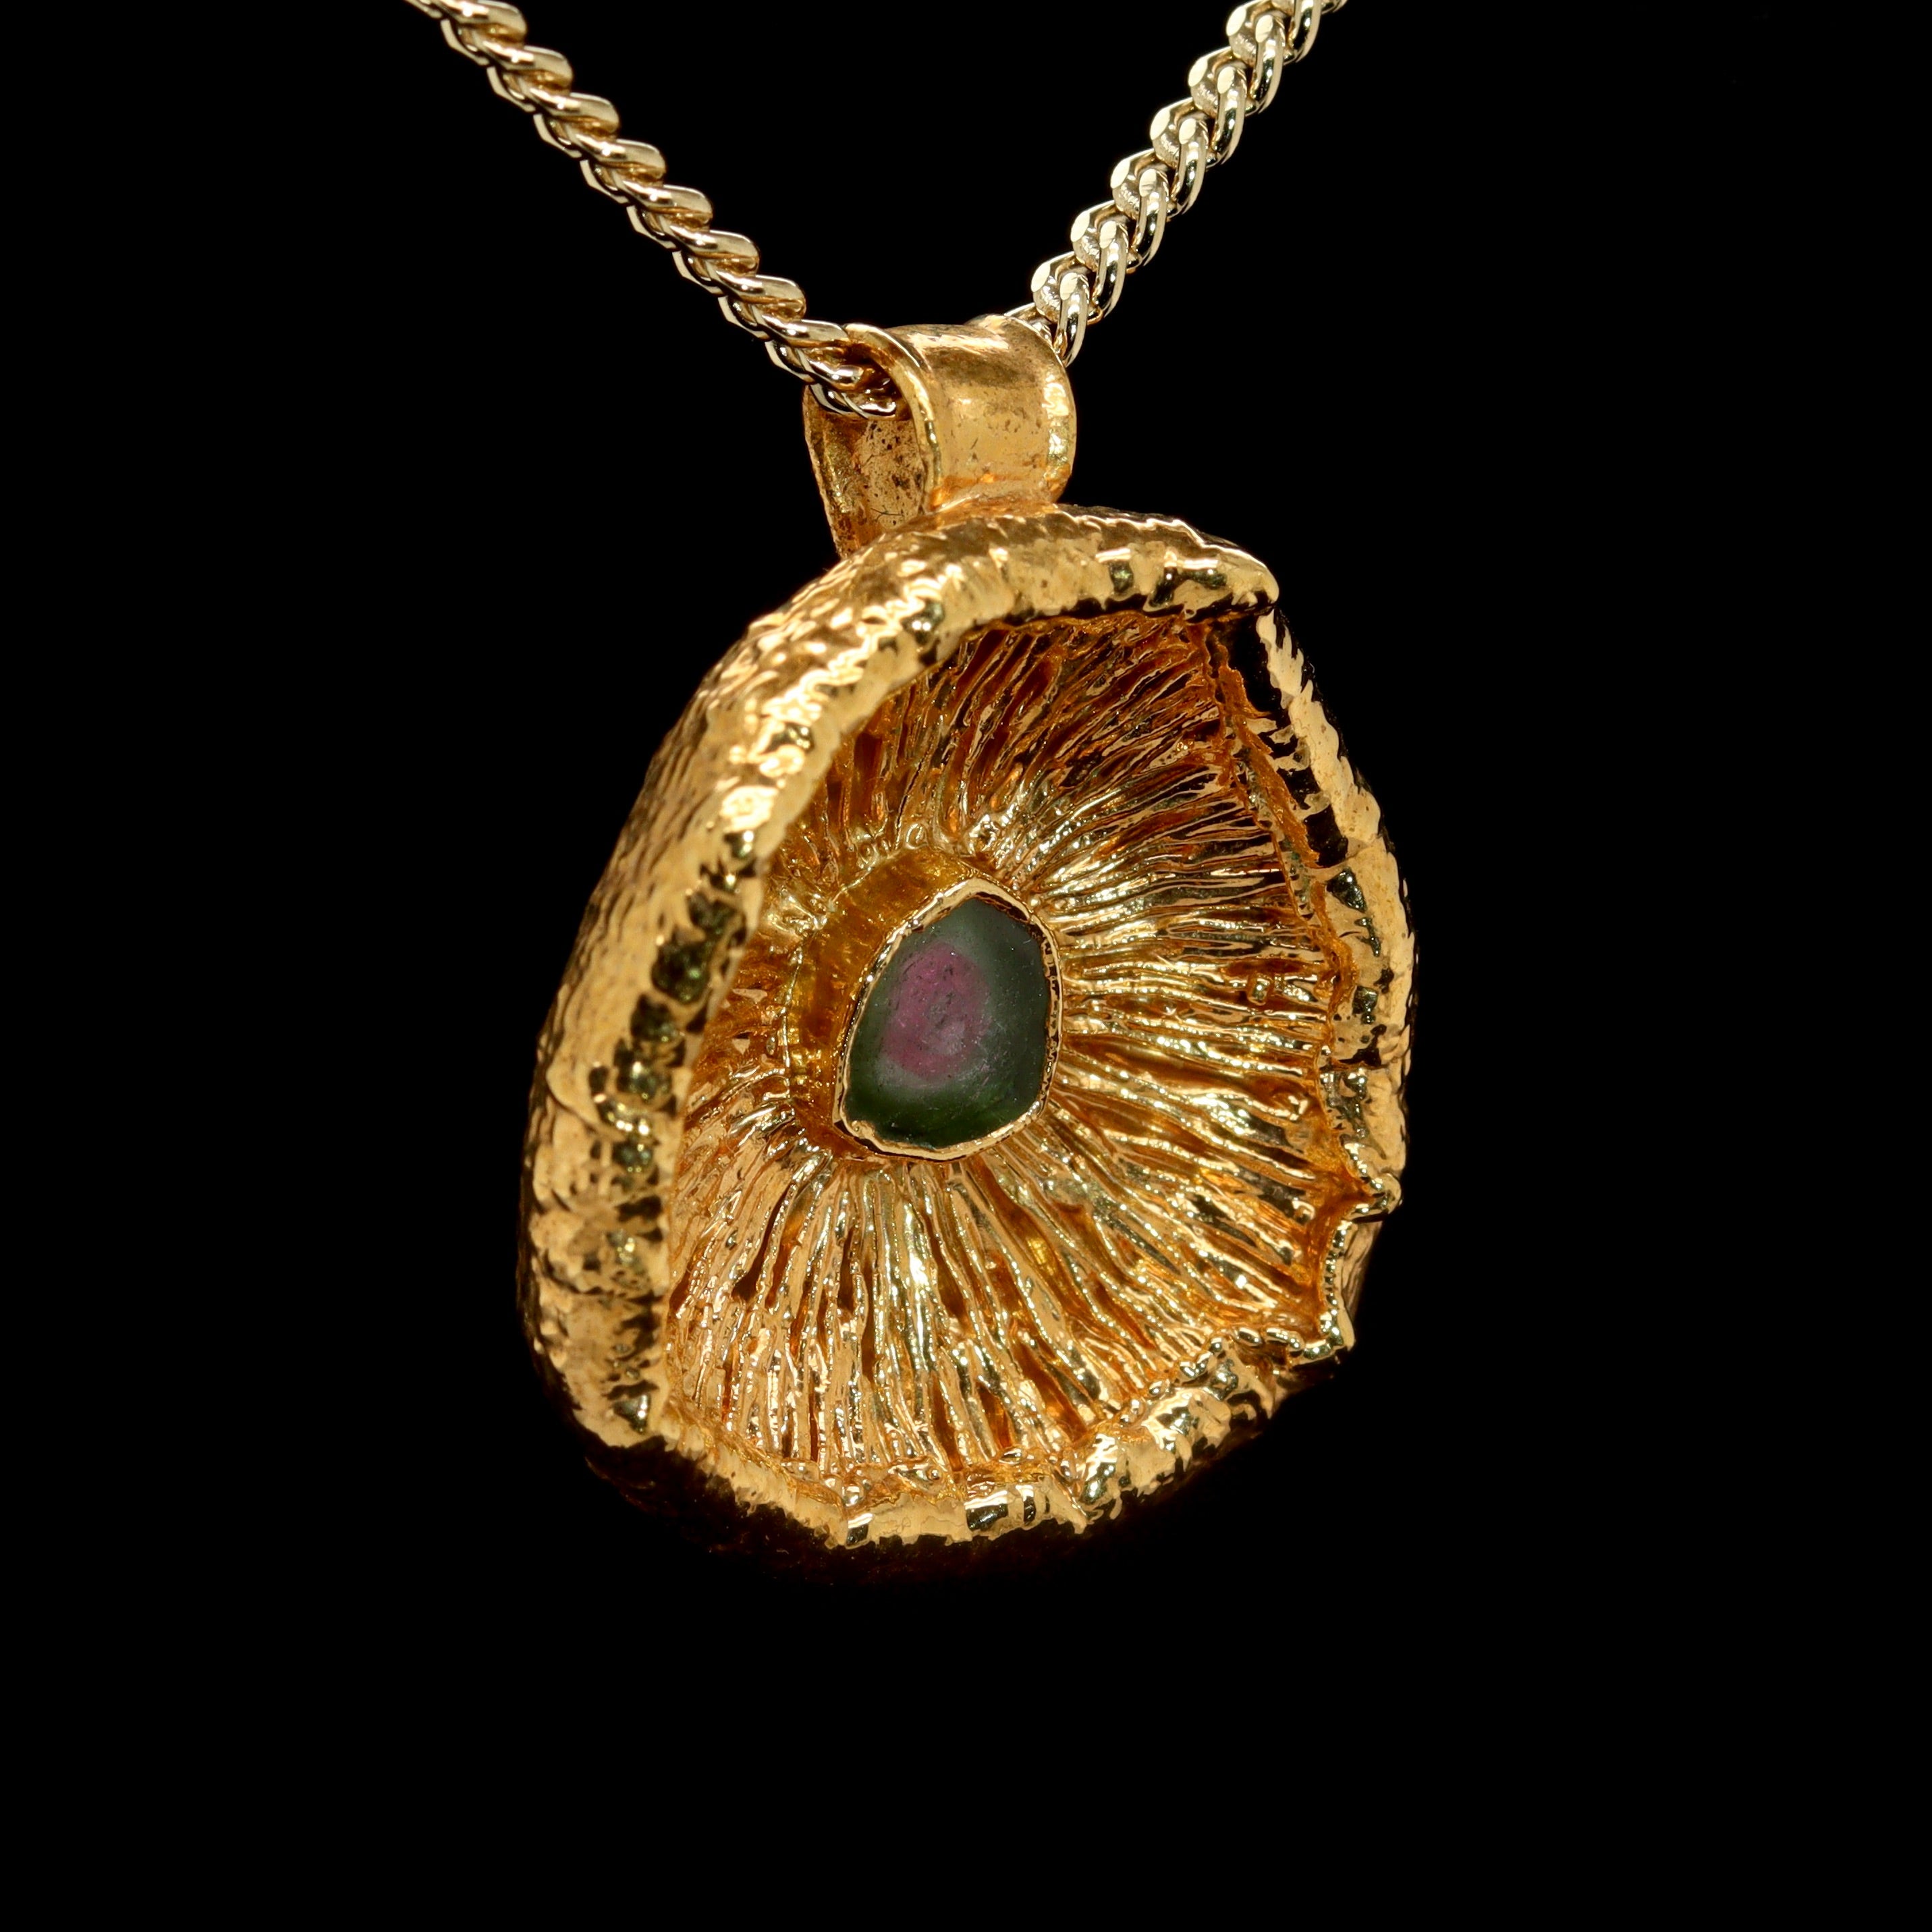 24k Special Collection Cap Pendant with Watermelon Tourmaline